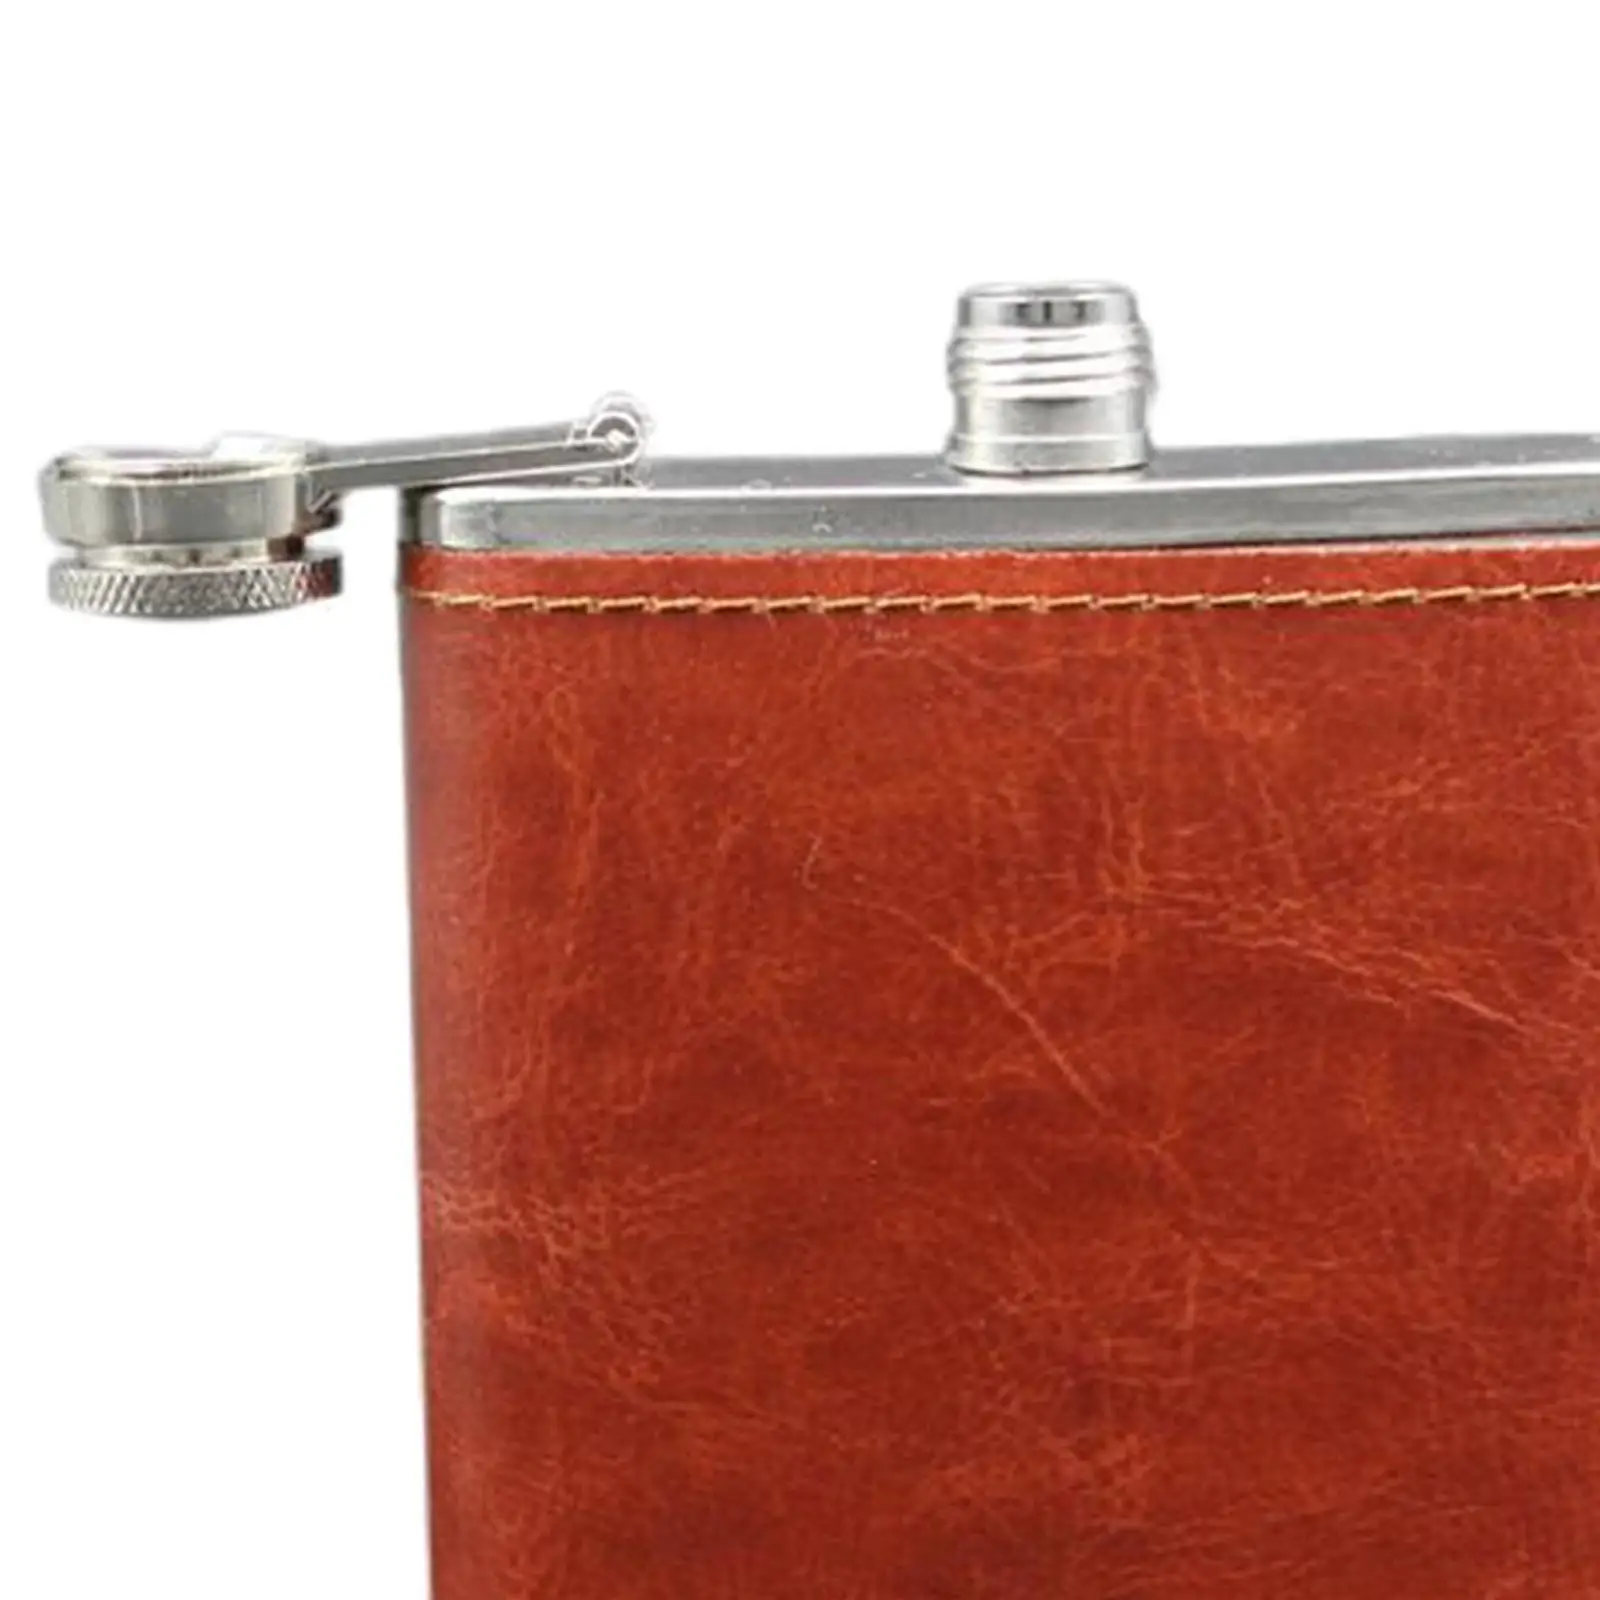 Hip Flask Sealed with PU Leather Wrapped Flagon for Groomsman Camping Traveling Man Gifts Fishing